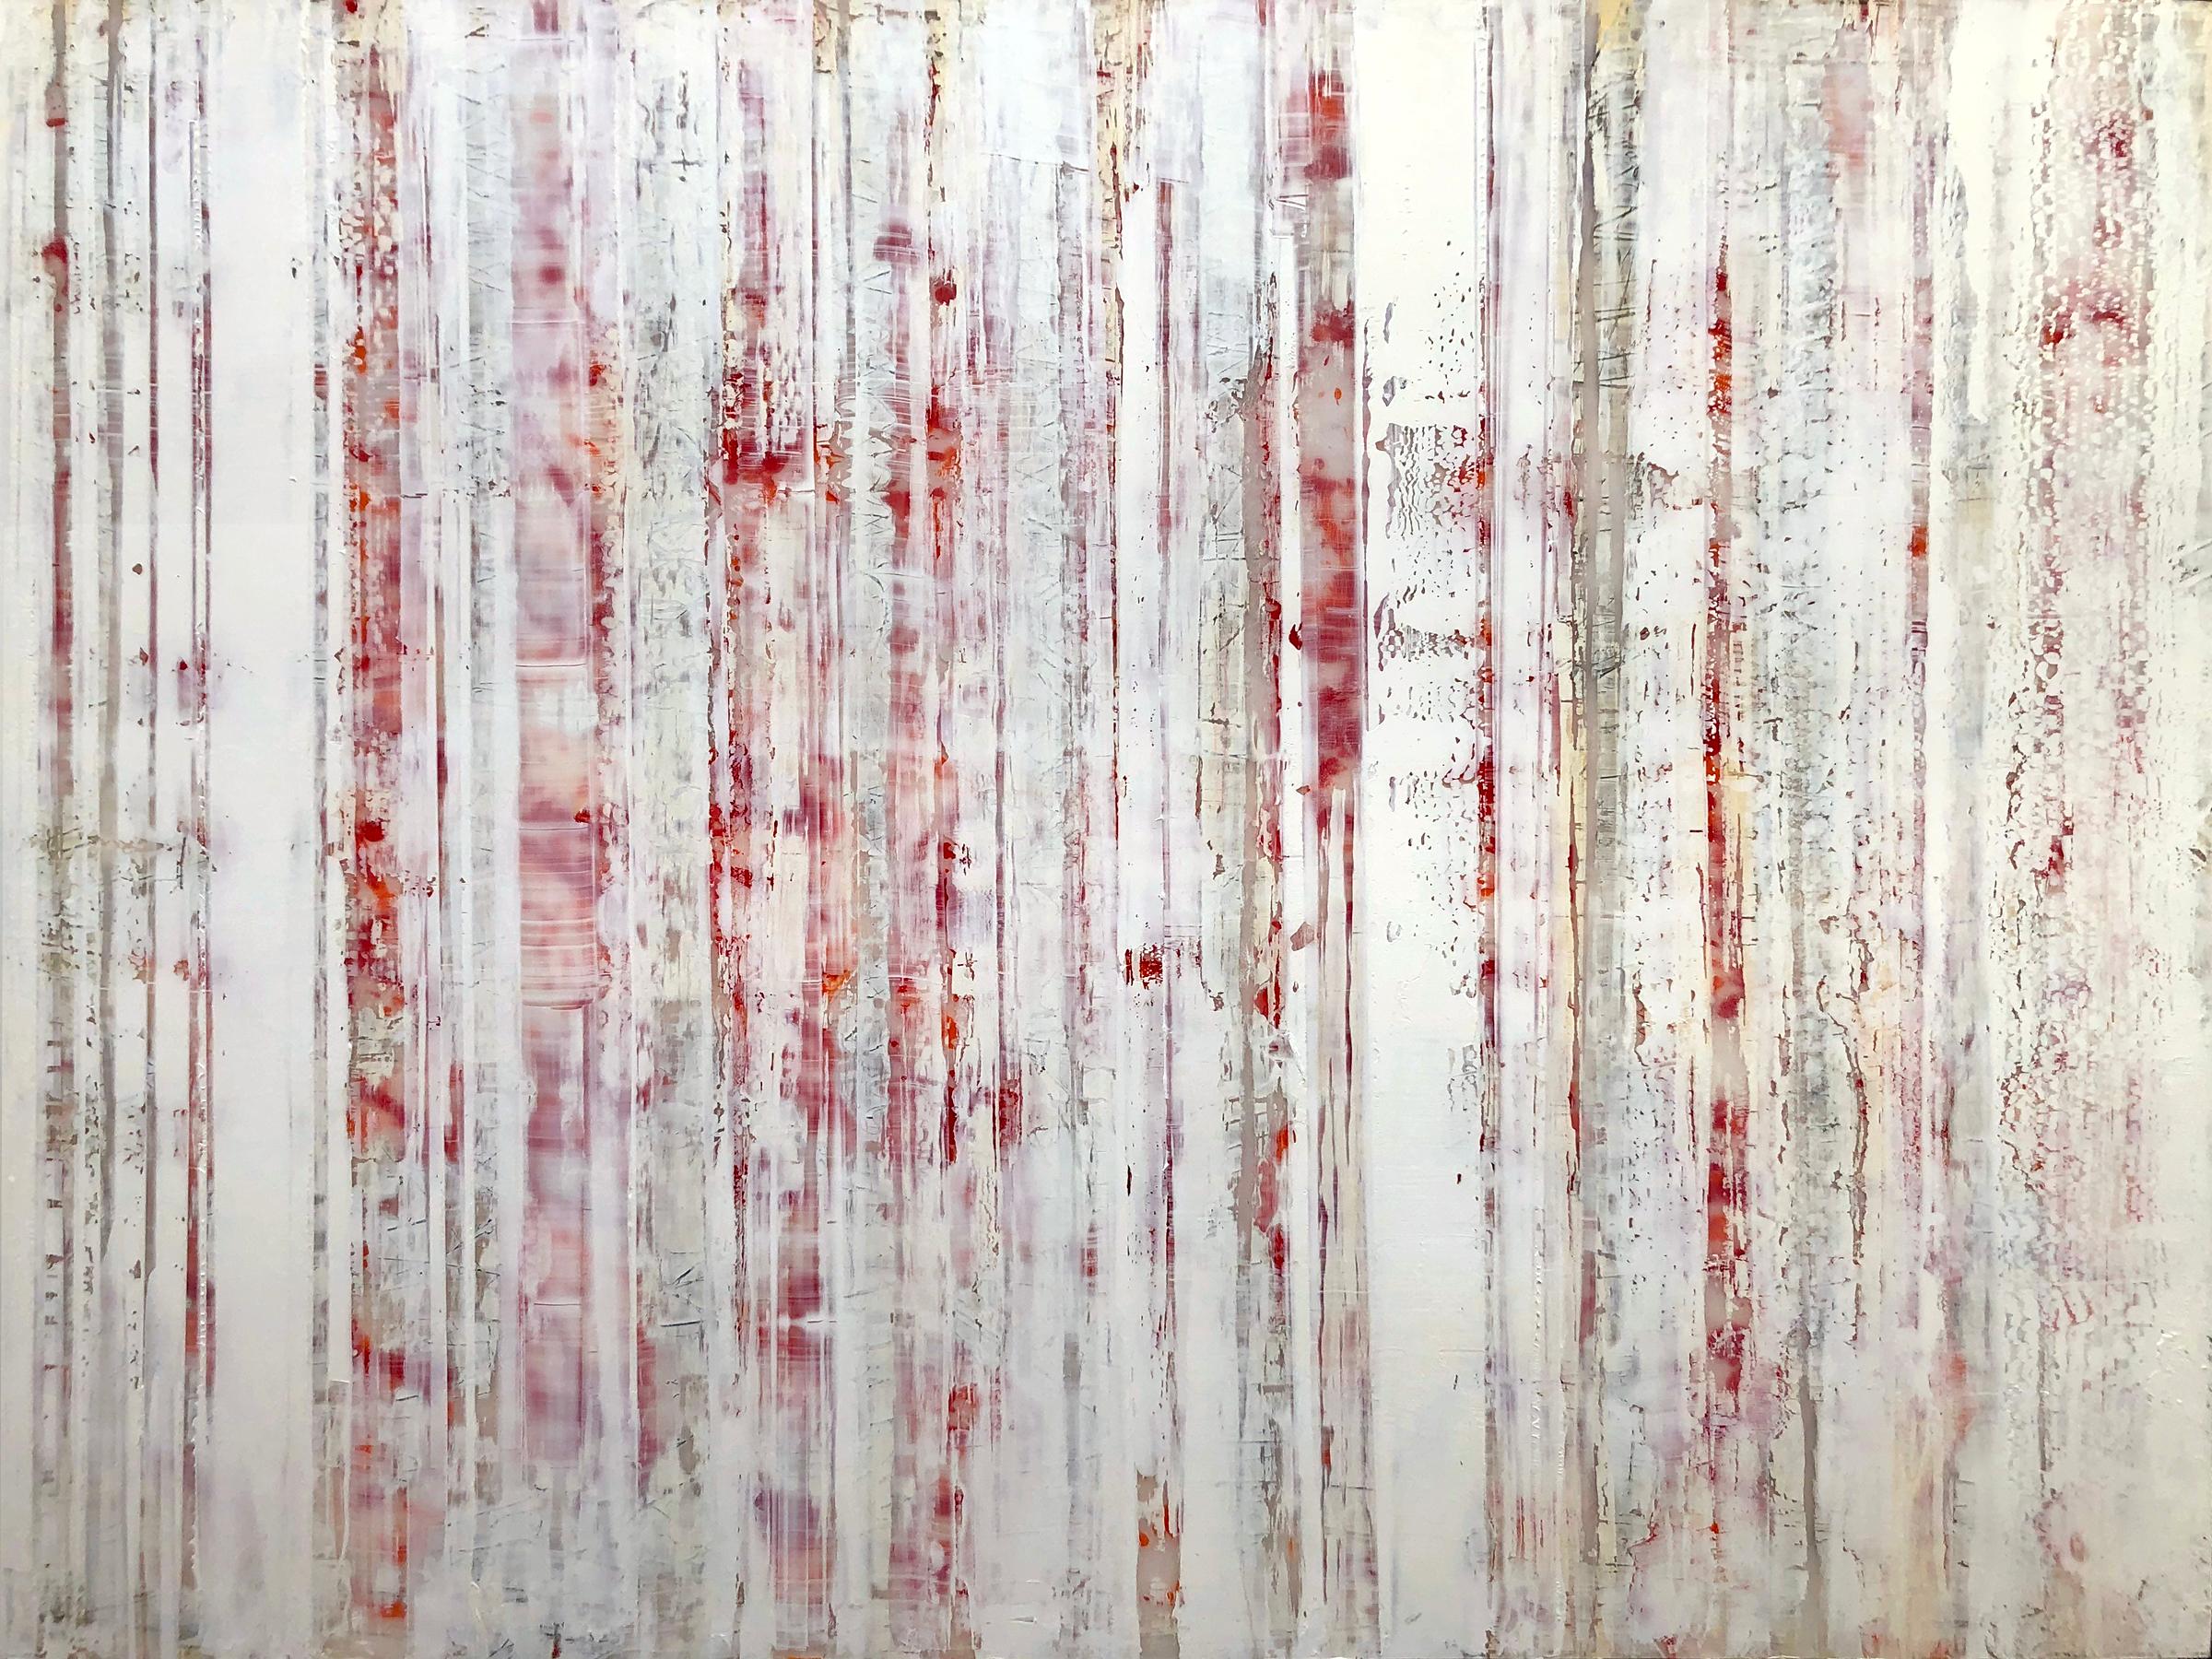 Abstract Painting Greg Ragland - Superpositions parallèles 23 rouges